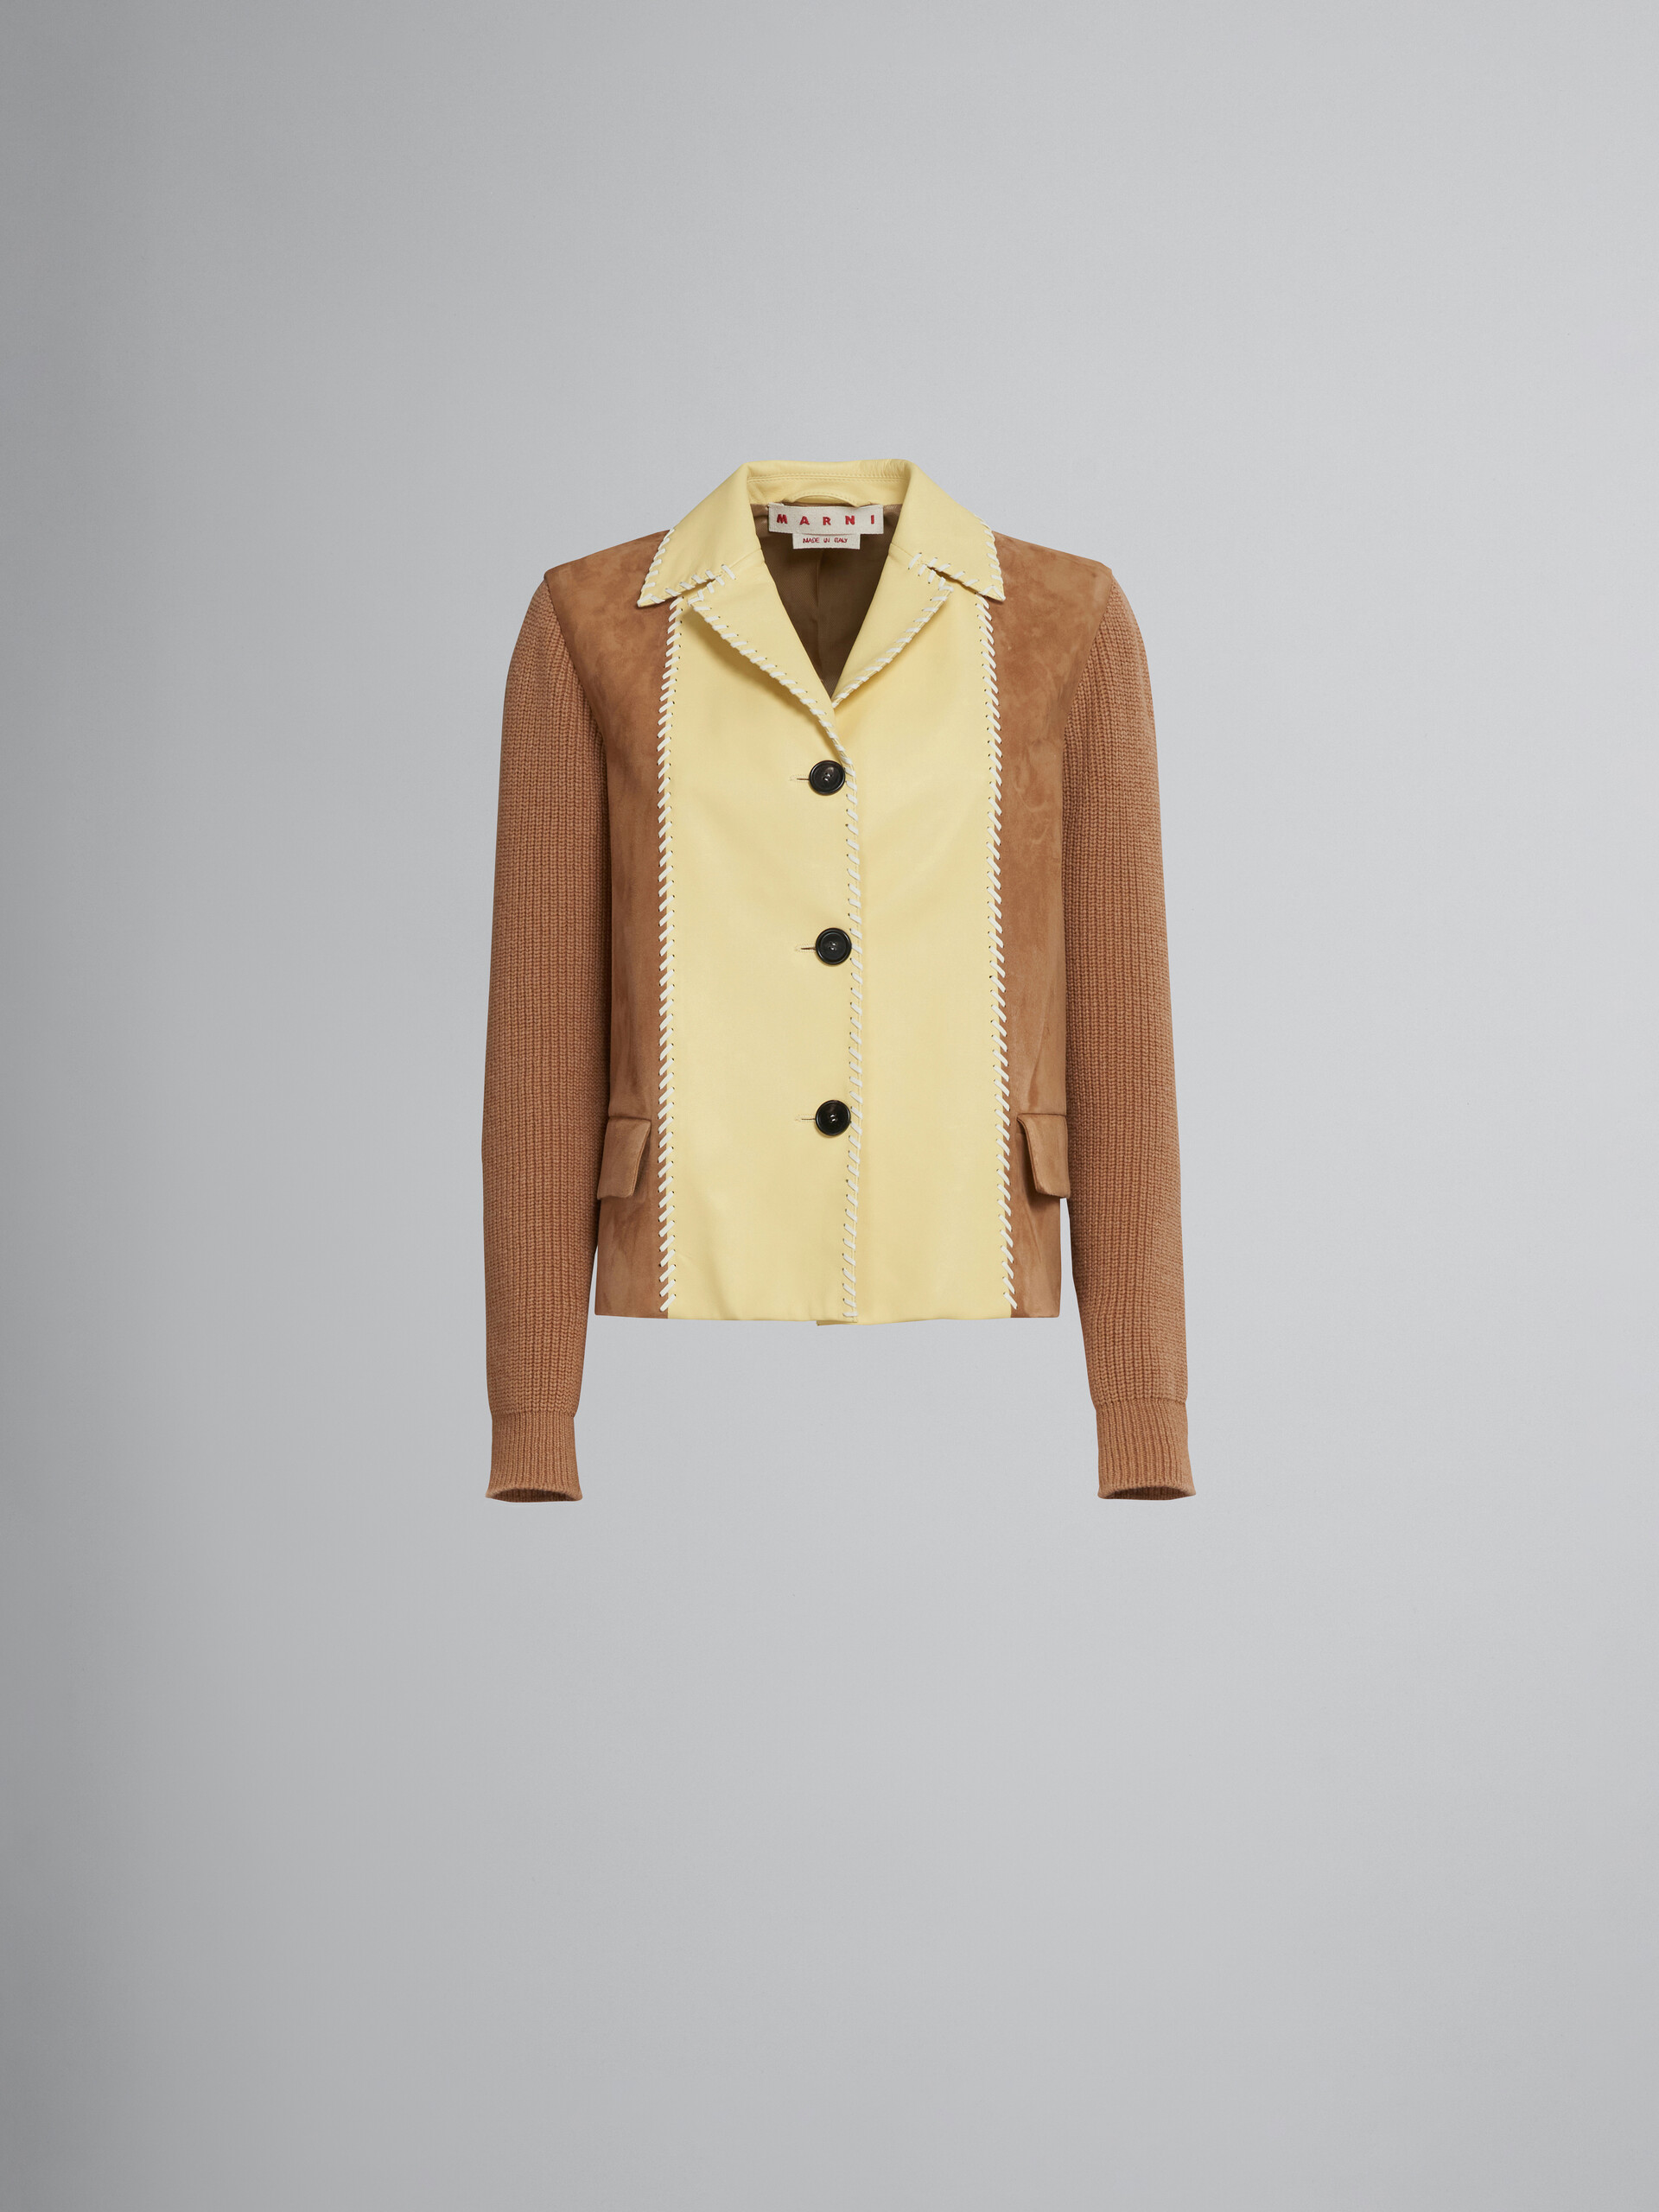 Suede and wool jacket - Jackets - Image 1